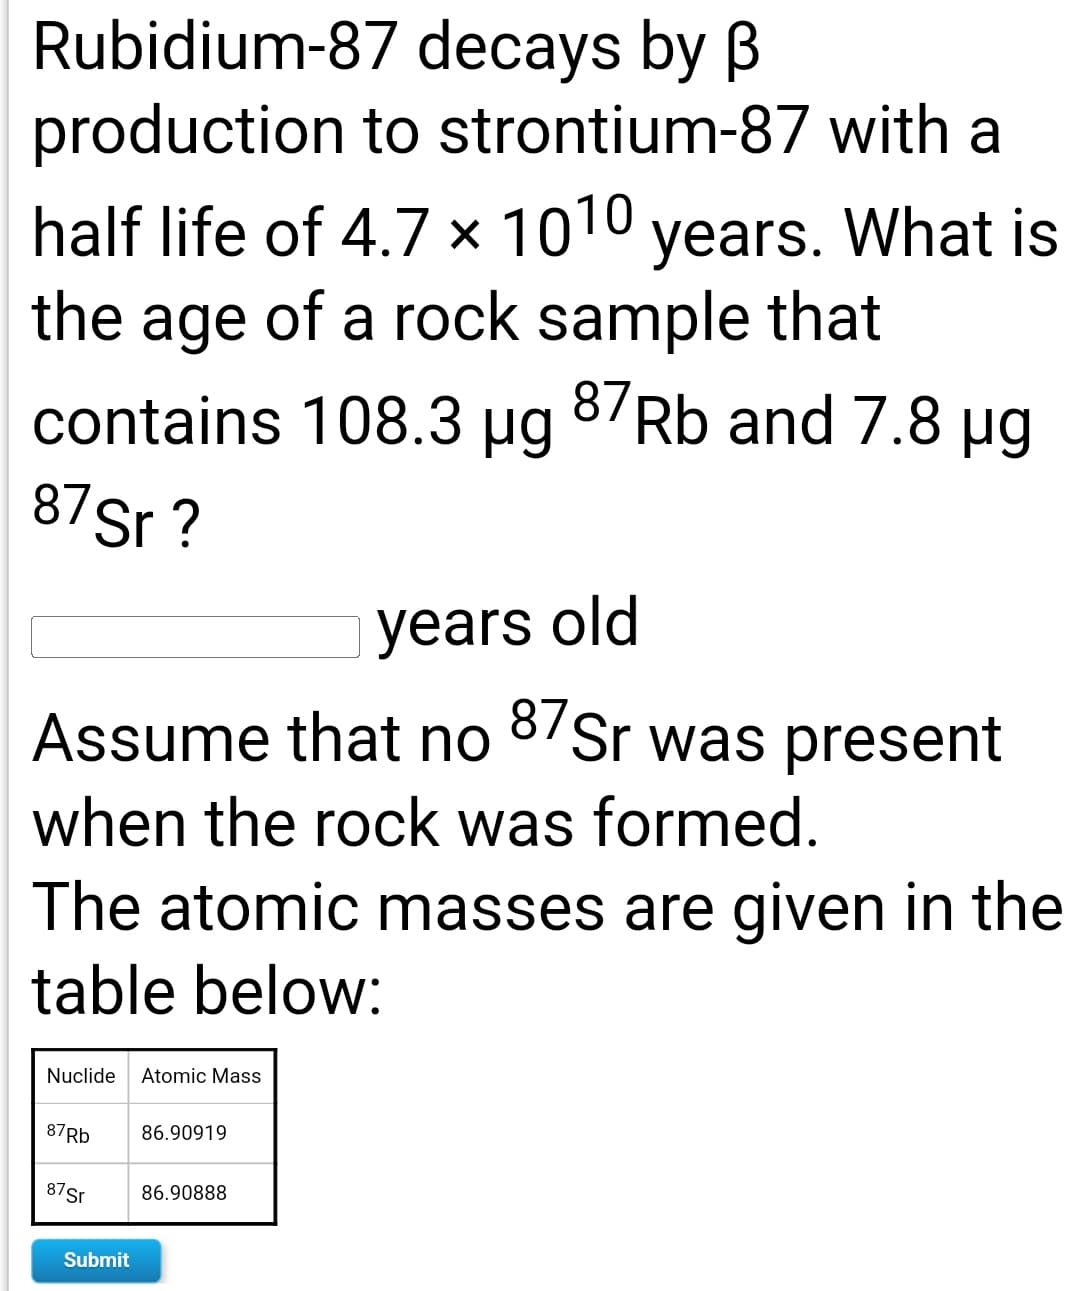 Rubidium-87 decays by B
production to strontium-87 with a
half life of 4.7 × 1010 years. What is
the age of a rock sample that
contains 108.3 µg
8/Rb and 7.8 µg
87Sr ?
years old
Assume that no 8/Sr was present
when the rock was formed.
The atomic masses are given in the
table below:
Nuclide
Atomic Mass
87RB
86.90919
87Sr
86.90888
Submit
